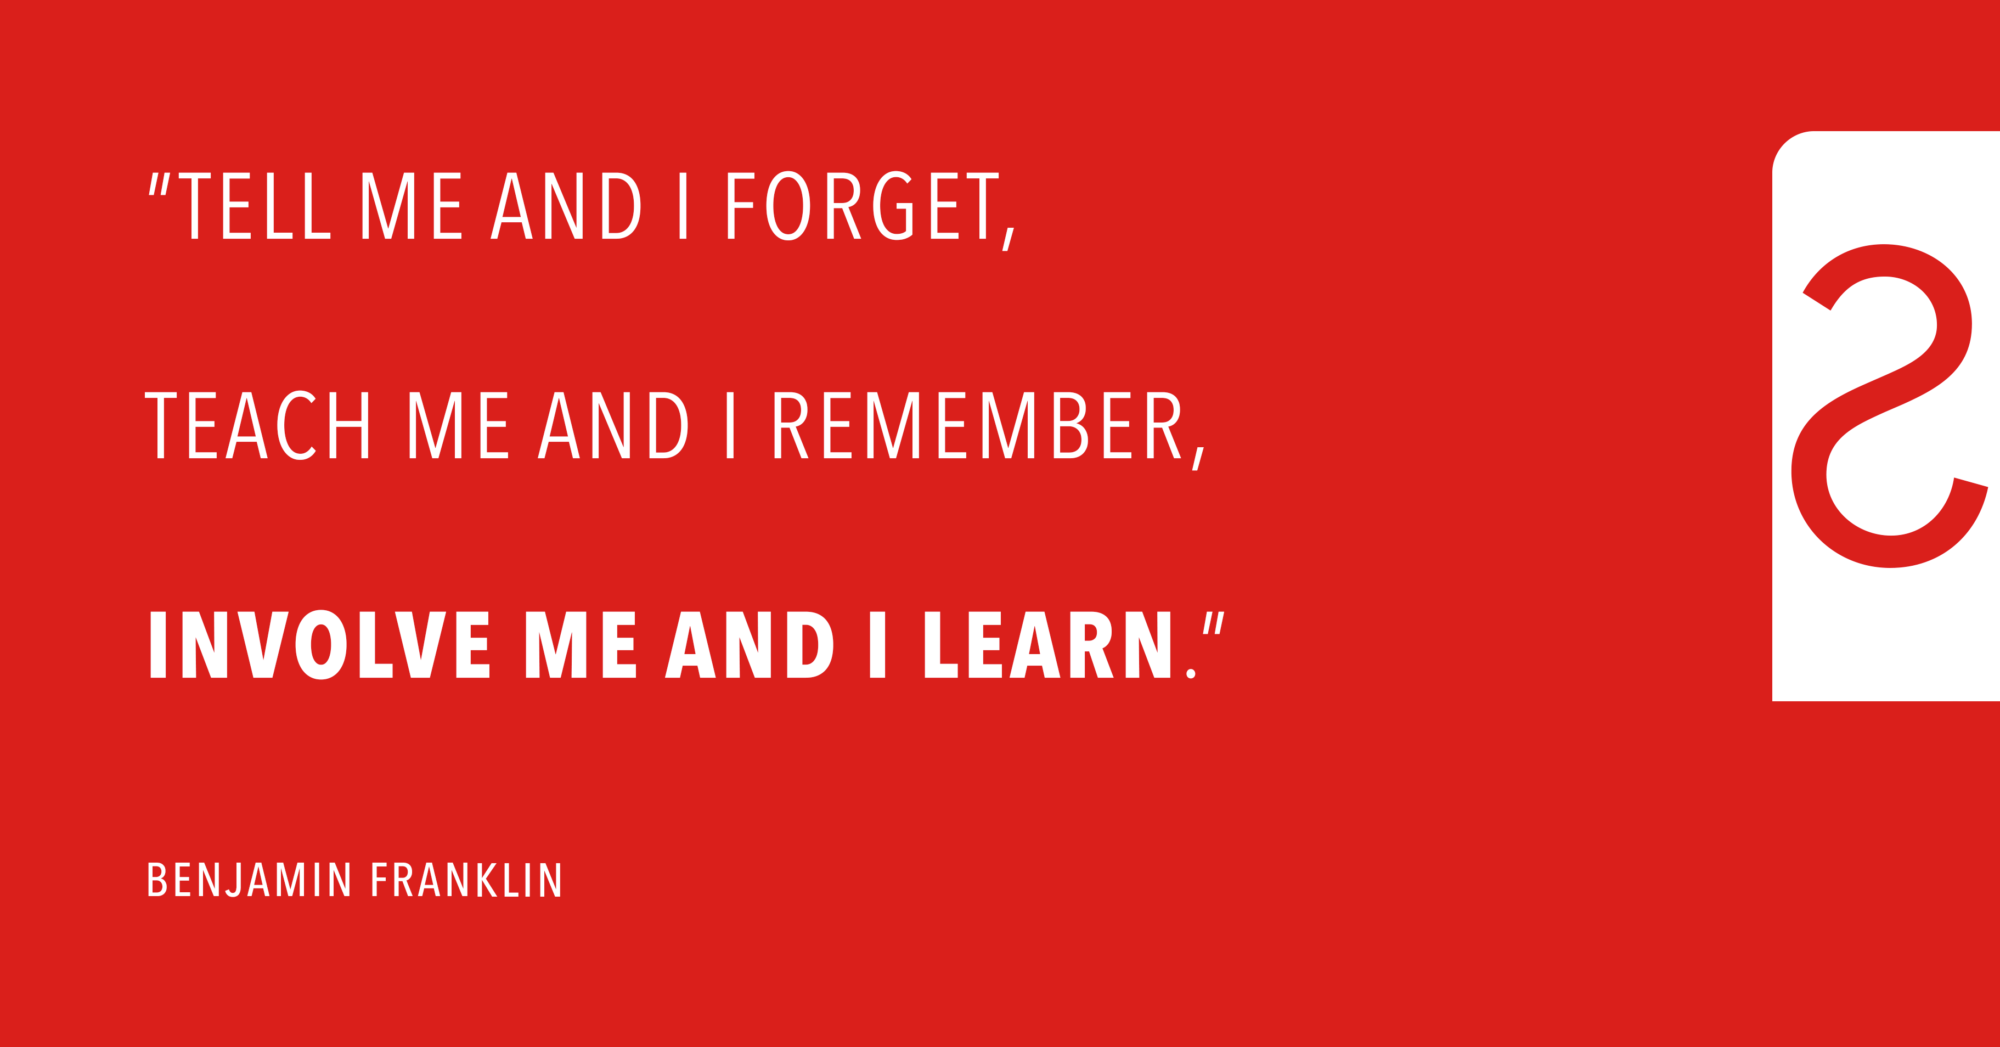 Tell Me And I Forget. Teach Me And I Remember. Involve Me And I Learn